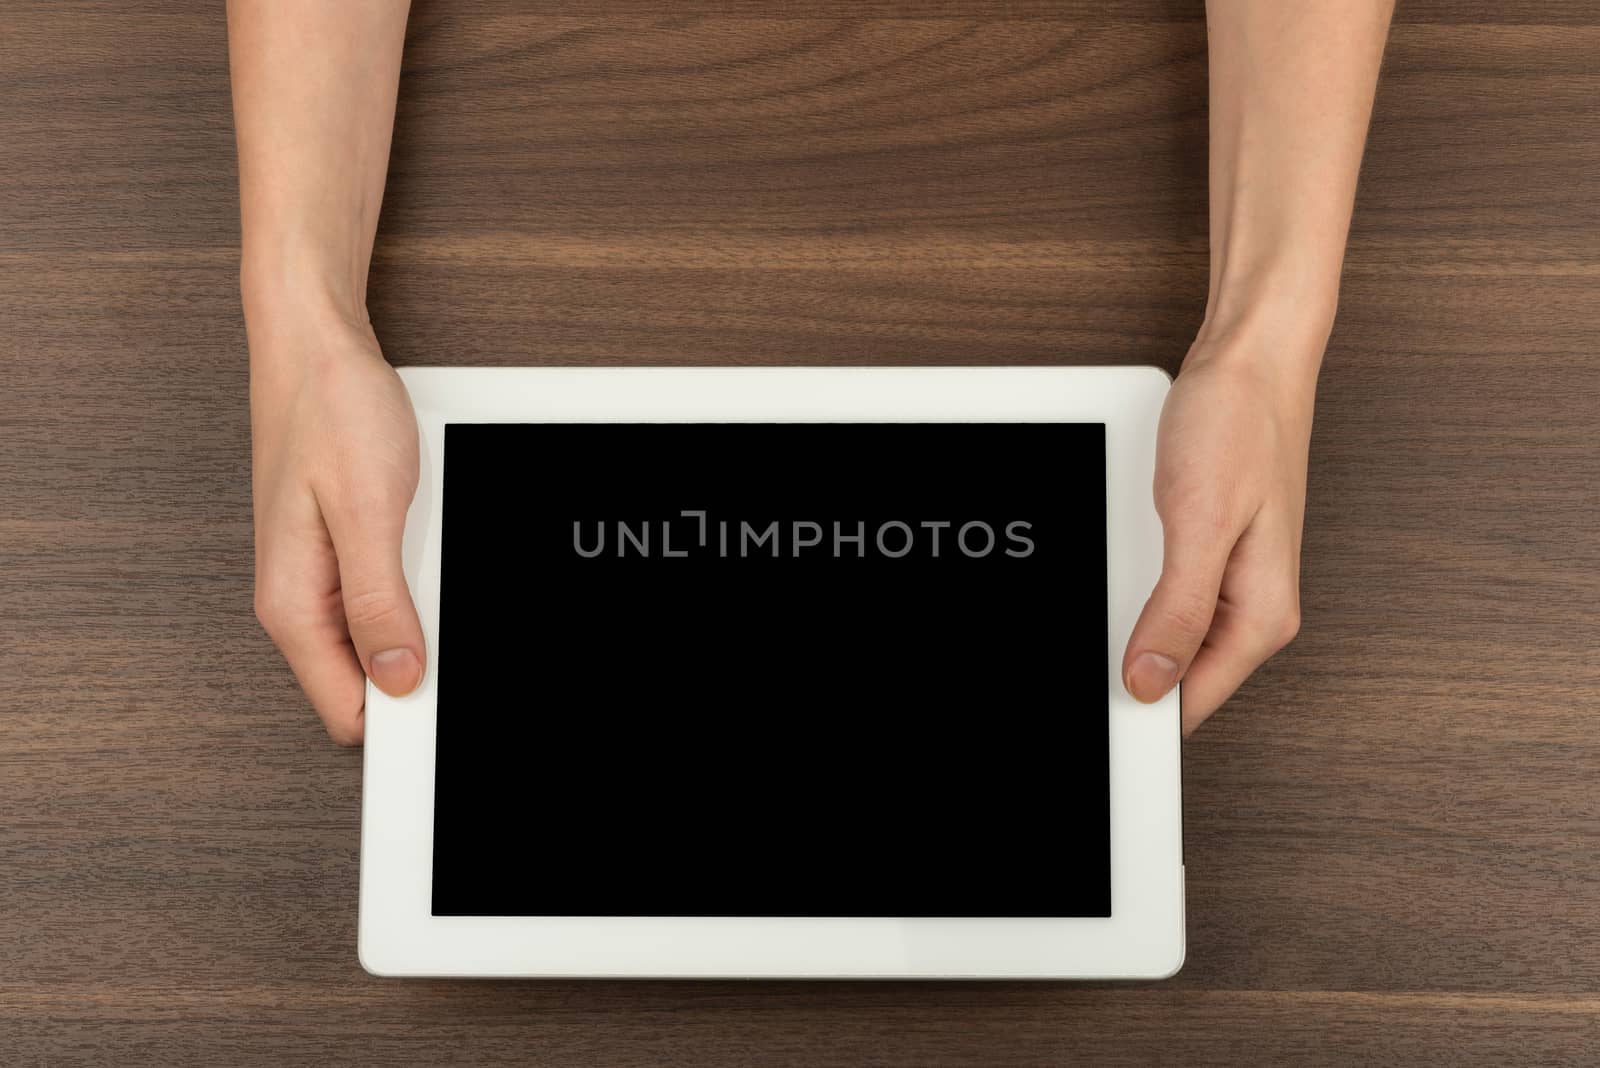 Humans hands holding tablet on wooden table background